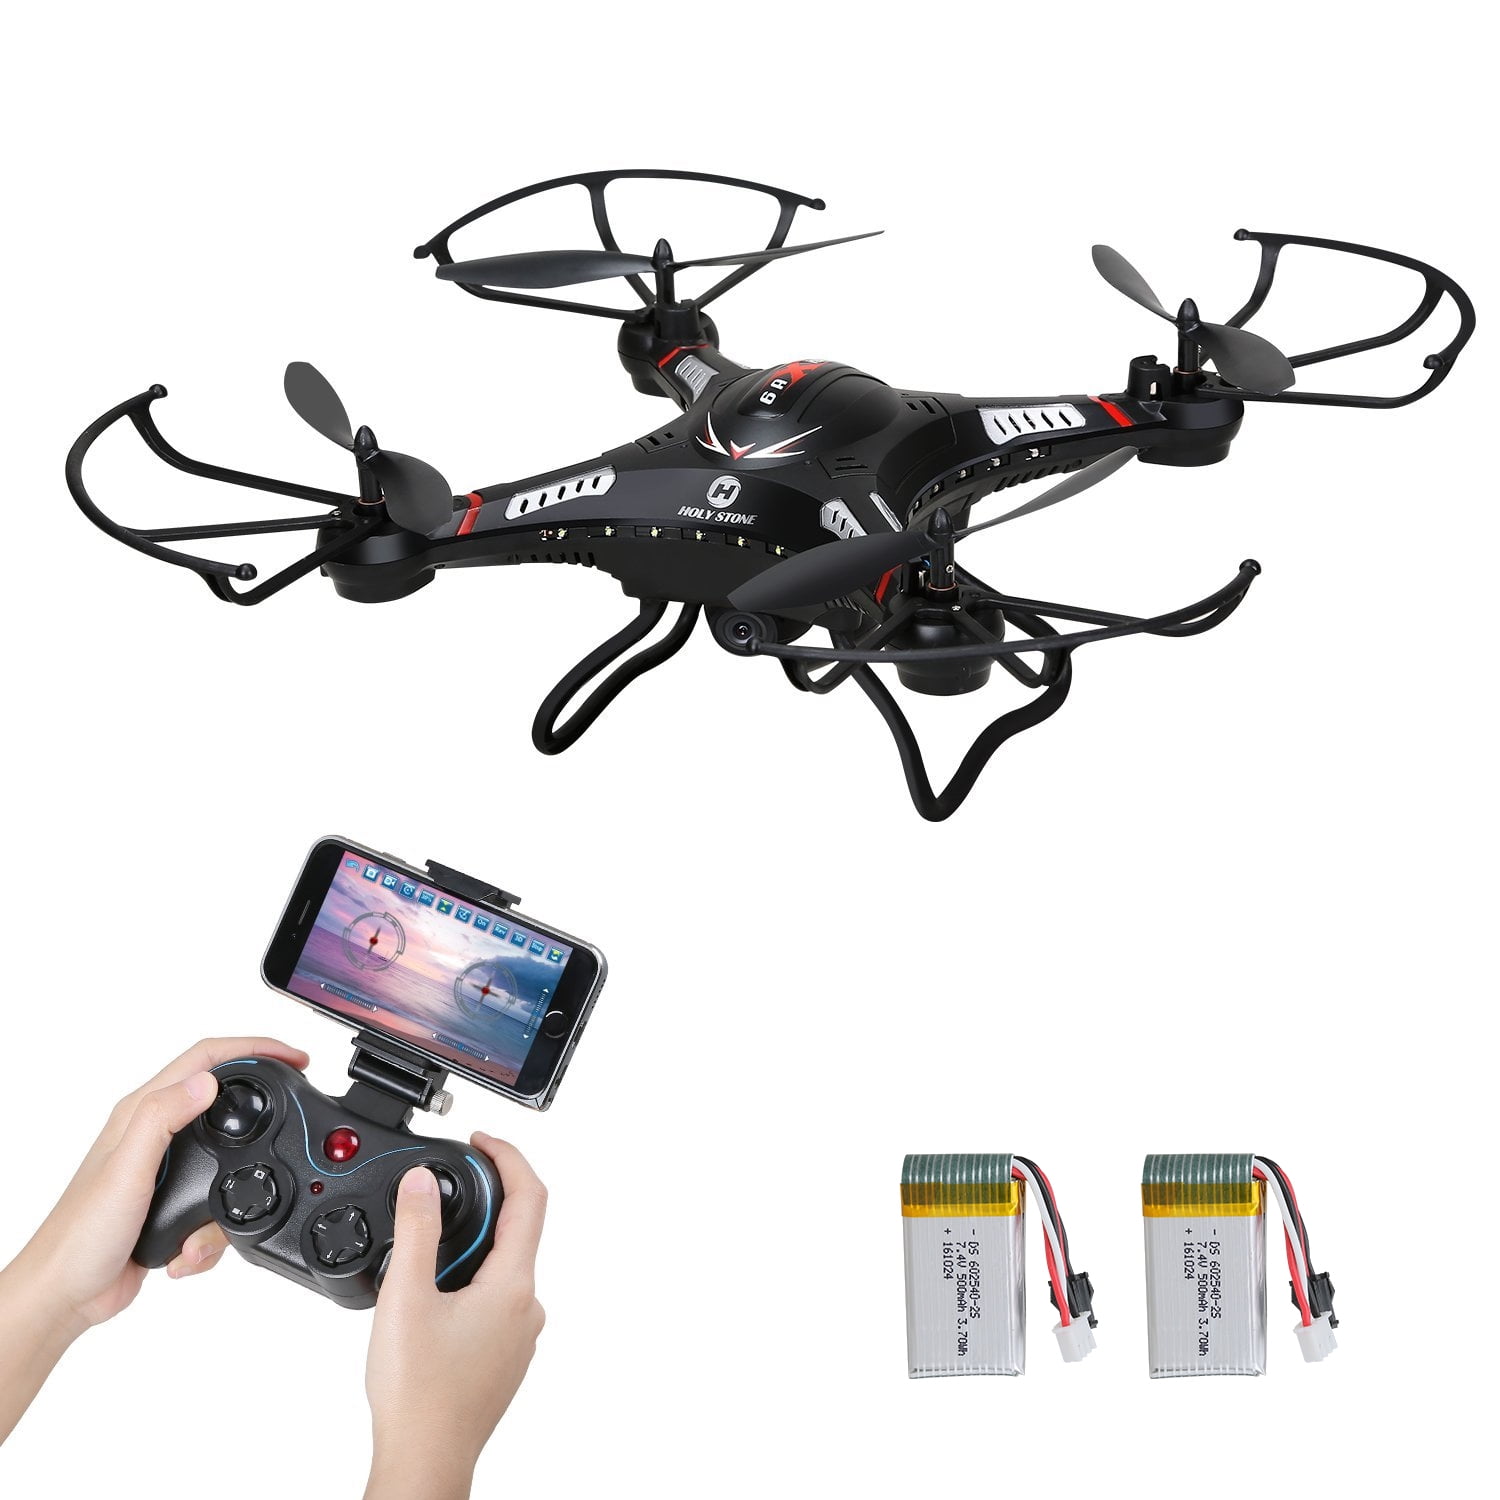 Gyro 6. S5w FPV WIFI RC Quadcopter Foldable Quadcopter RC Drone with WIFI Camera. Jx815-6x квадрокоптер. Квадрокоптер HOBBYKING x550. Квадрокоптер Aviator 2.4GHZ FPV Video Stream.